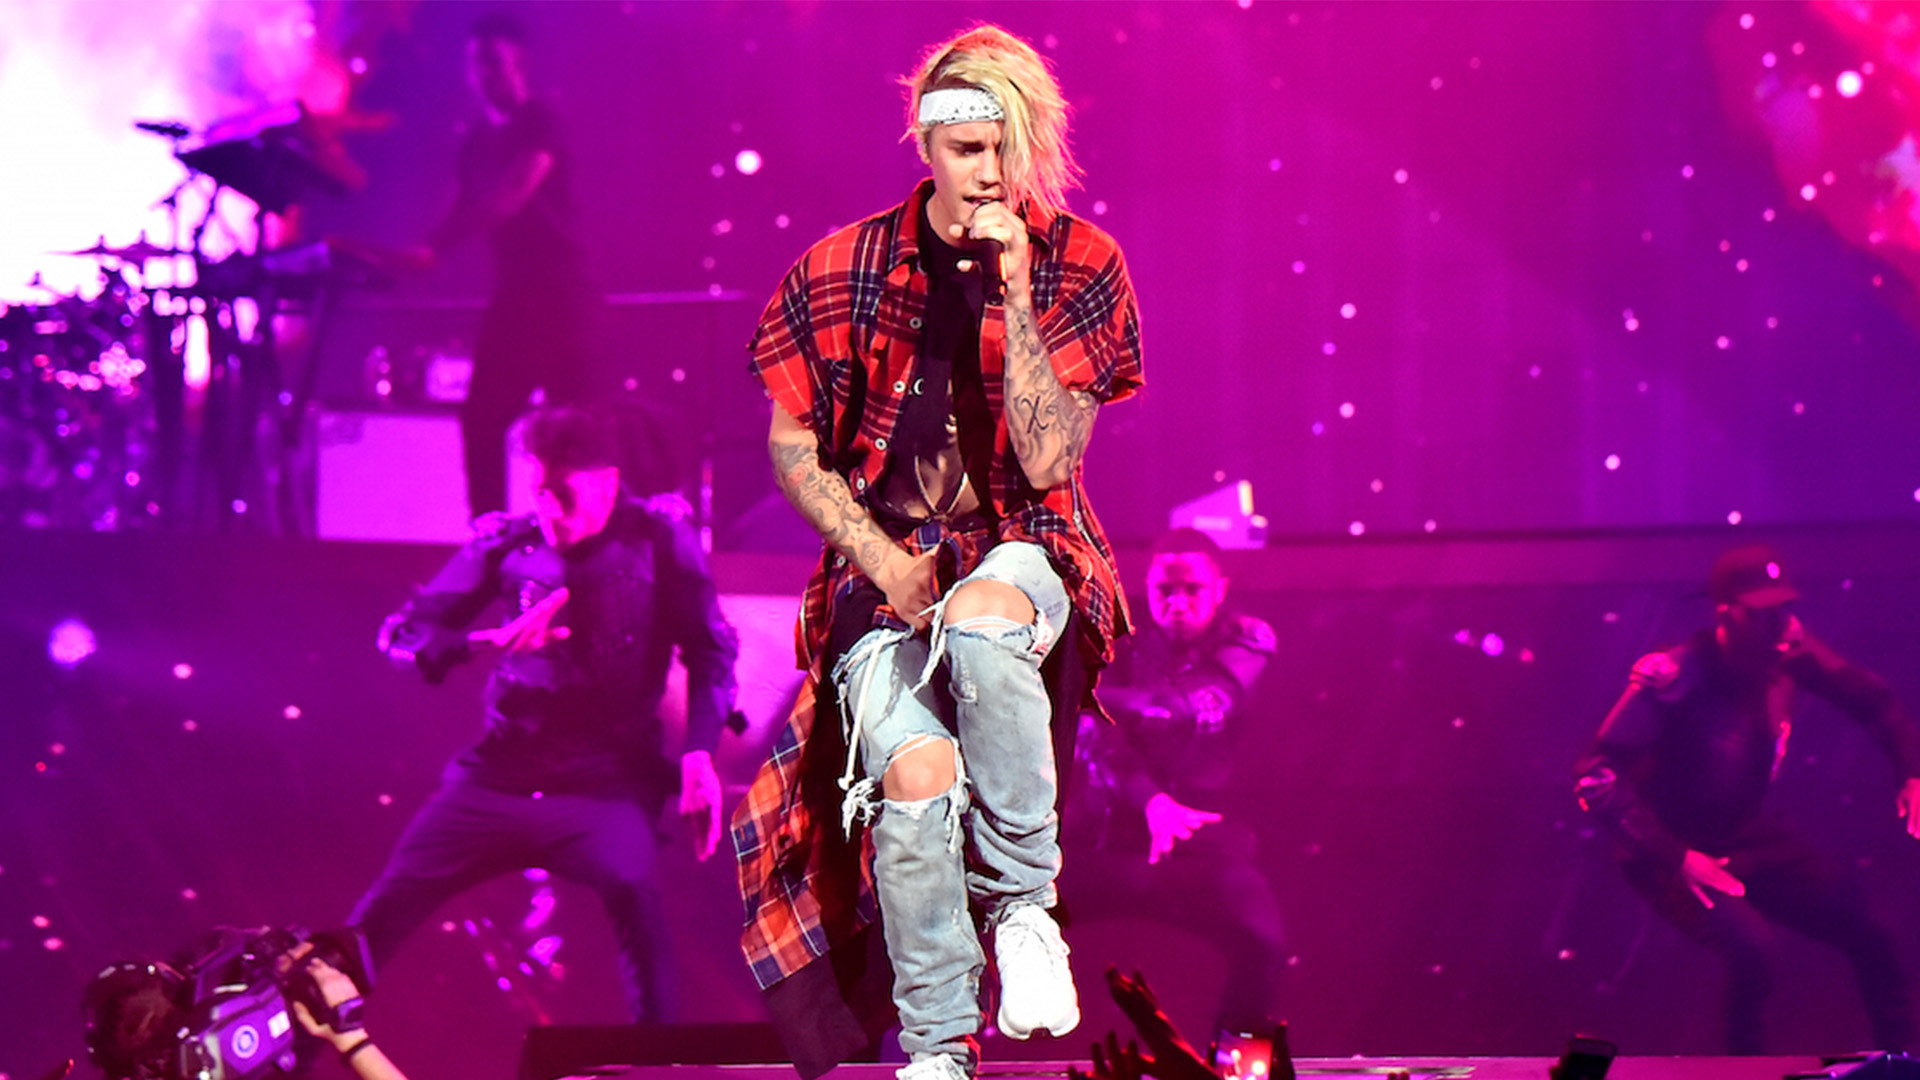 1920x1080 Justin Bieber shares Christian message with fans at concert: 'Mark my words  Jesus loves